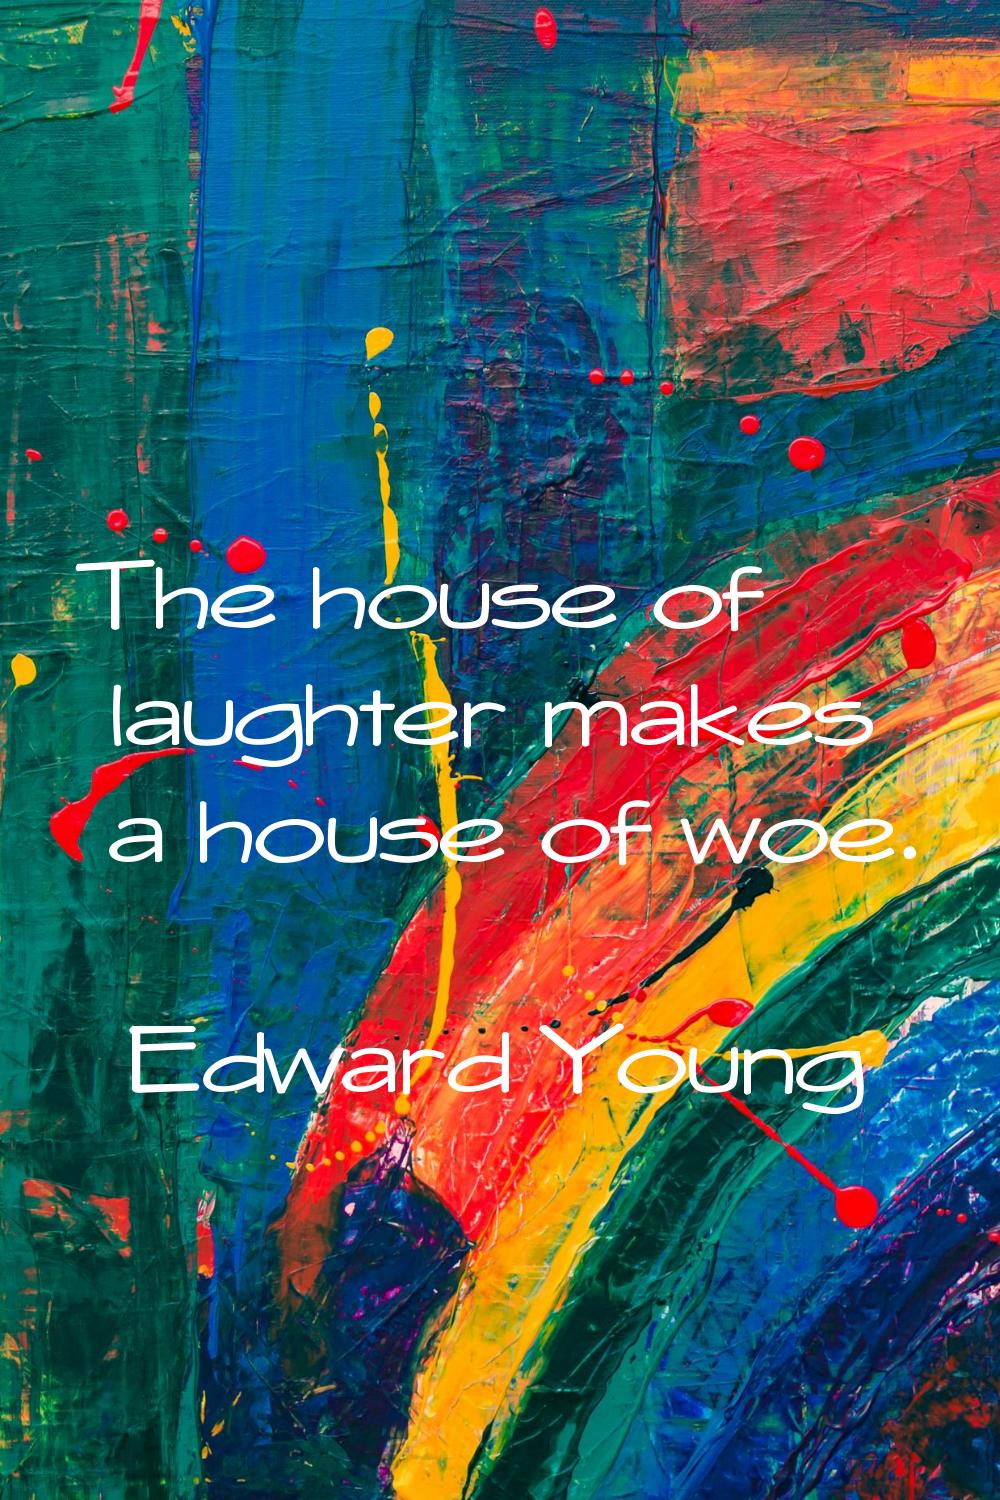 The house of laughter makes a house of woe.